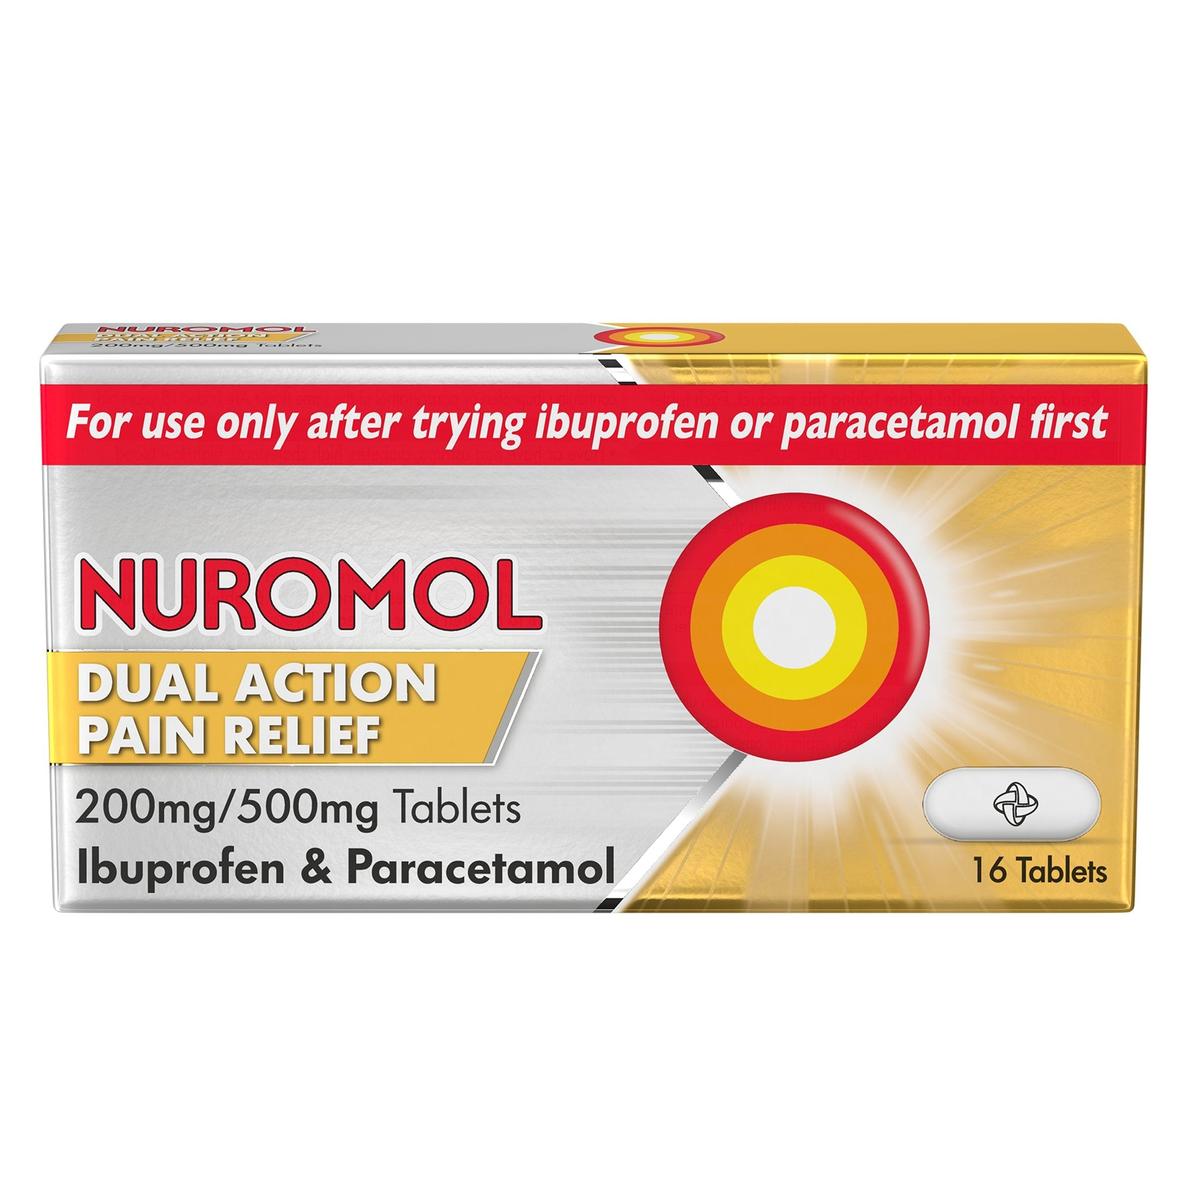 Nuromol dual action pain relief tablets offers at £499 in Lloyds Pharmacy